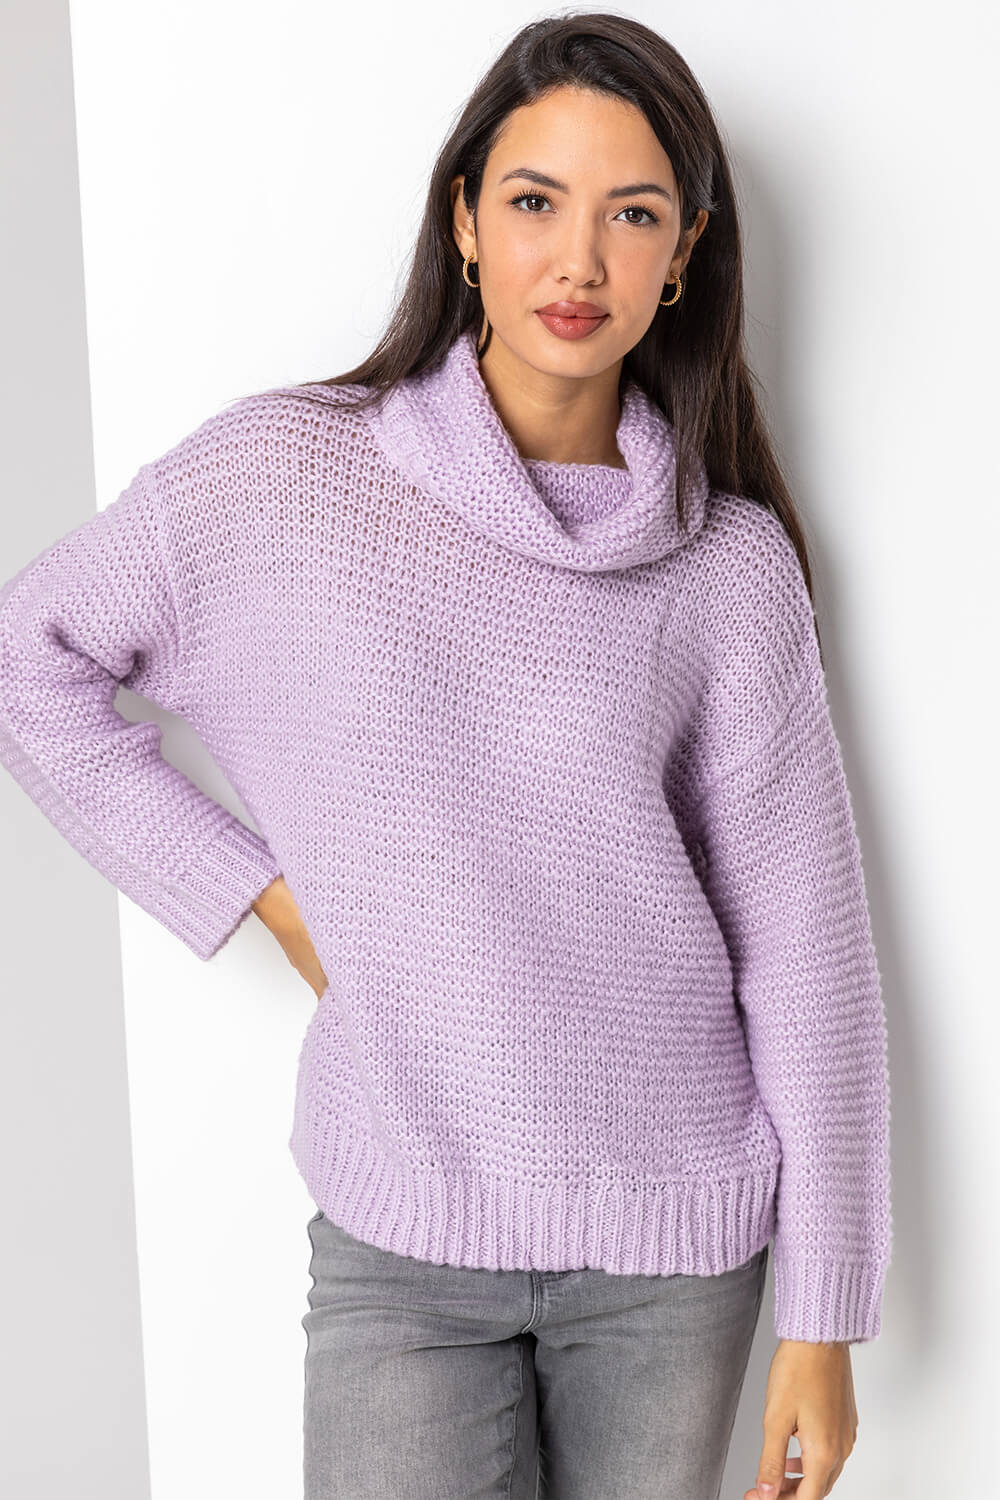 Lilac Textured Roll Neck Jumper, Image 5 of 5